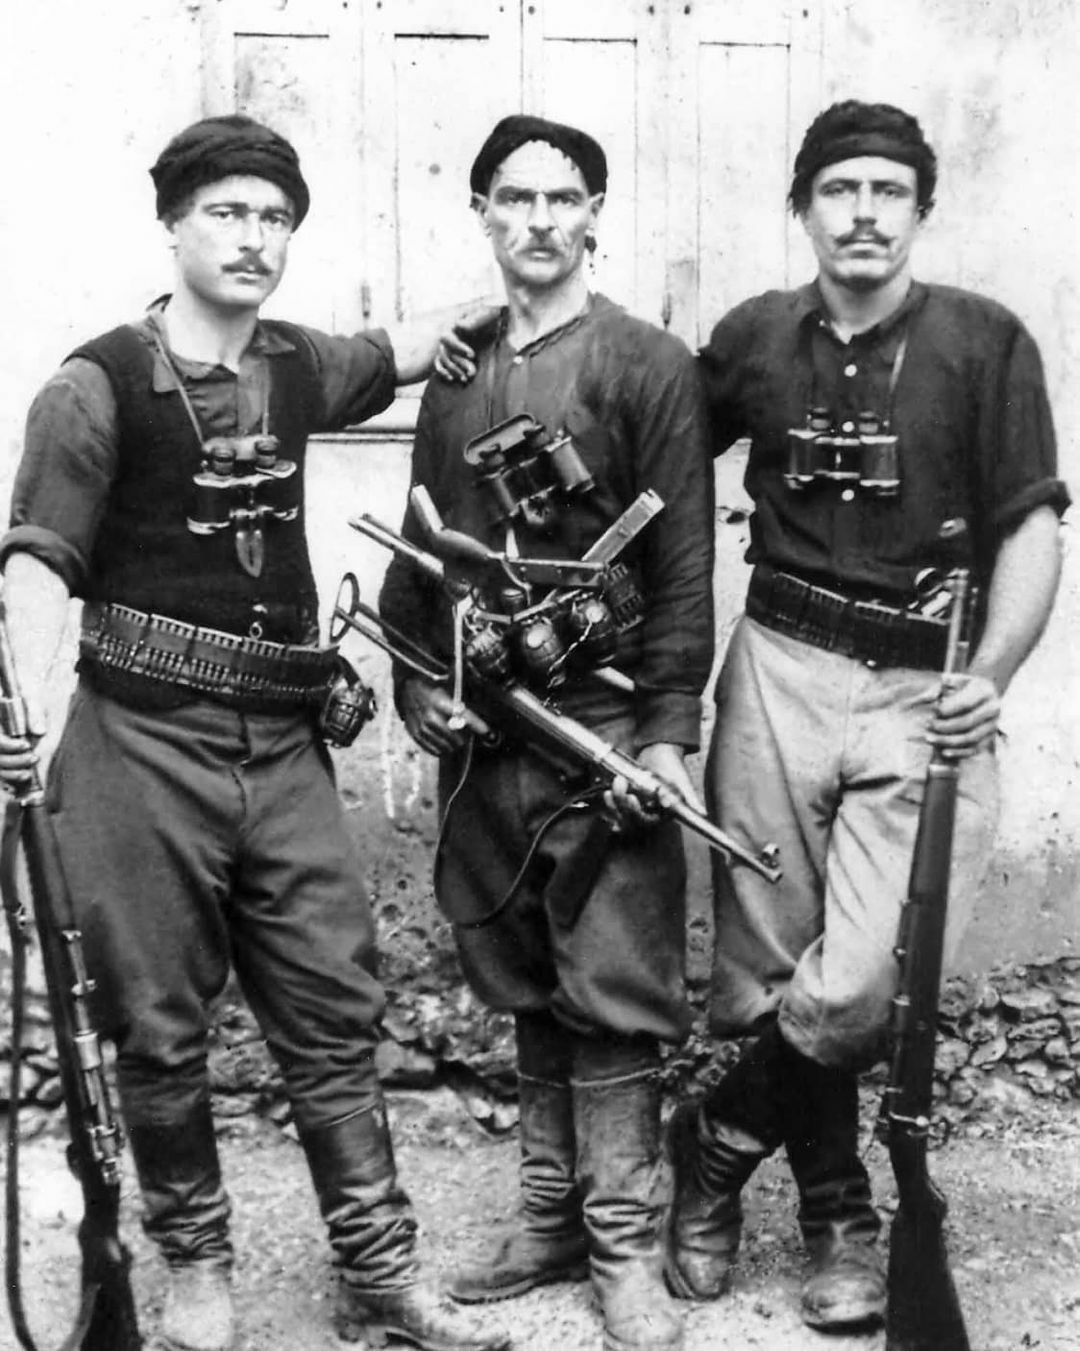 Greek Partisans Pose For A Photograph Following The German Invasion Of The Island Of Crete In 1941